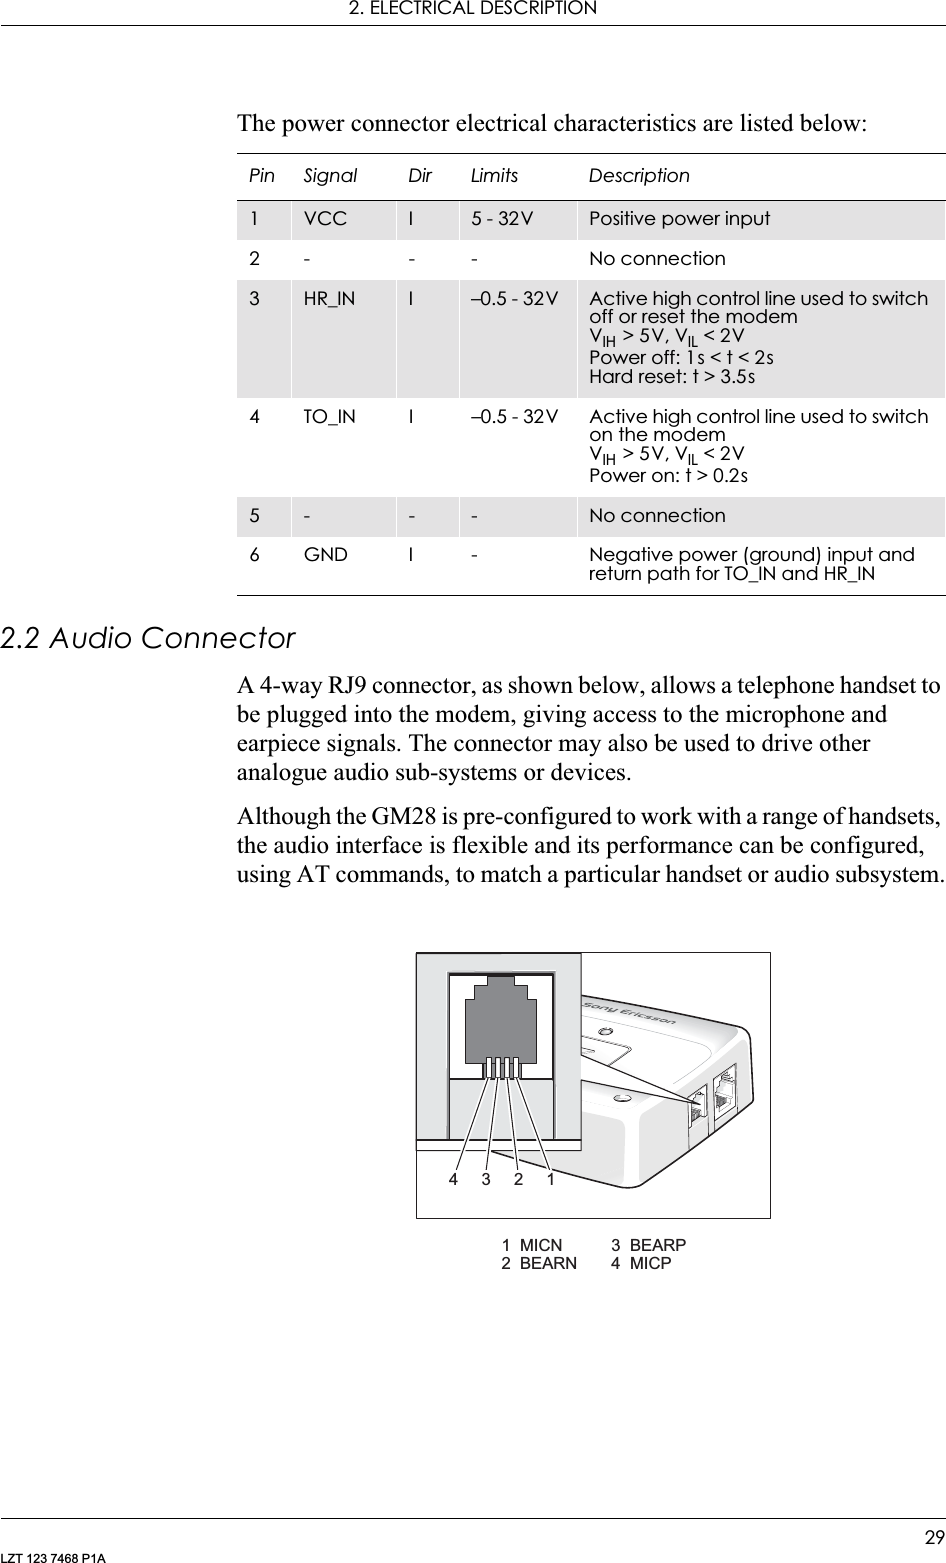 2. ELECTRICAL DESCRIPTION29LZT 123 7468 P1AThe power connector electrical characteristics are listed below:2.2 Audio ConnectorA 4-way RJ9 connector, as shown below, allows a telephone handset to be plugged into the modem, giving access to the microphone and earpiece signals. The connector may also be used to drive other analogue audio sub-systems or devices.Although the GM28 is pre-configured to work with a range of handsets, the audio interface is flexible and its performance can be configured, using AT commands, to match a particular handset or audio subsystem.Pin Signal Dir Limits Description1VCC I5 - 32V Positive power input2- - - No connection3HR_IN I–0.5 - 32V Active high control line used to switch off or reset the modemVIH &gt; 5V, VIL &lt; 2VPower off: 1s &lt; t &lt; 2sHard reset: t &gt; 3.5s4 TO_IN I –0.5 - 32V Active high control line used to switch on the modemVIH &gt; 5V, VIL &lt; 2VPower on: t &gt; 0.2s5 - - - No connection6 GND I - Negative power (ground) input and return path for TO_IN and HR_IN43211 MICN2 BEARN3 BEARP4 MICP